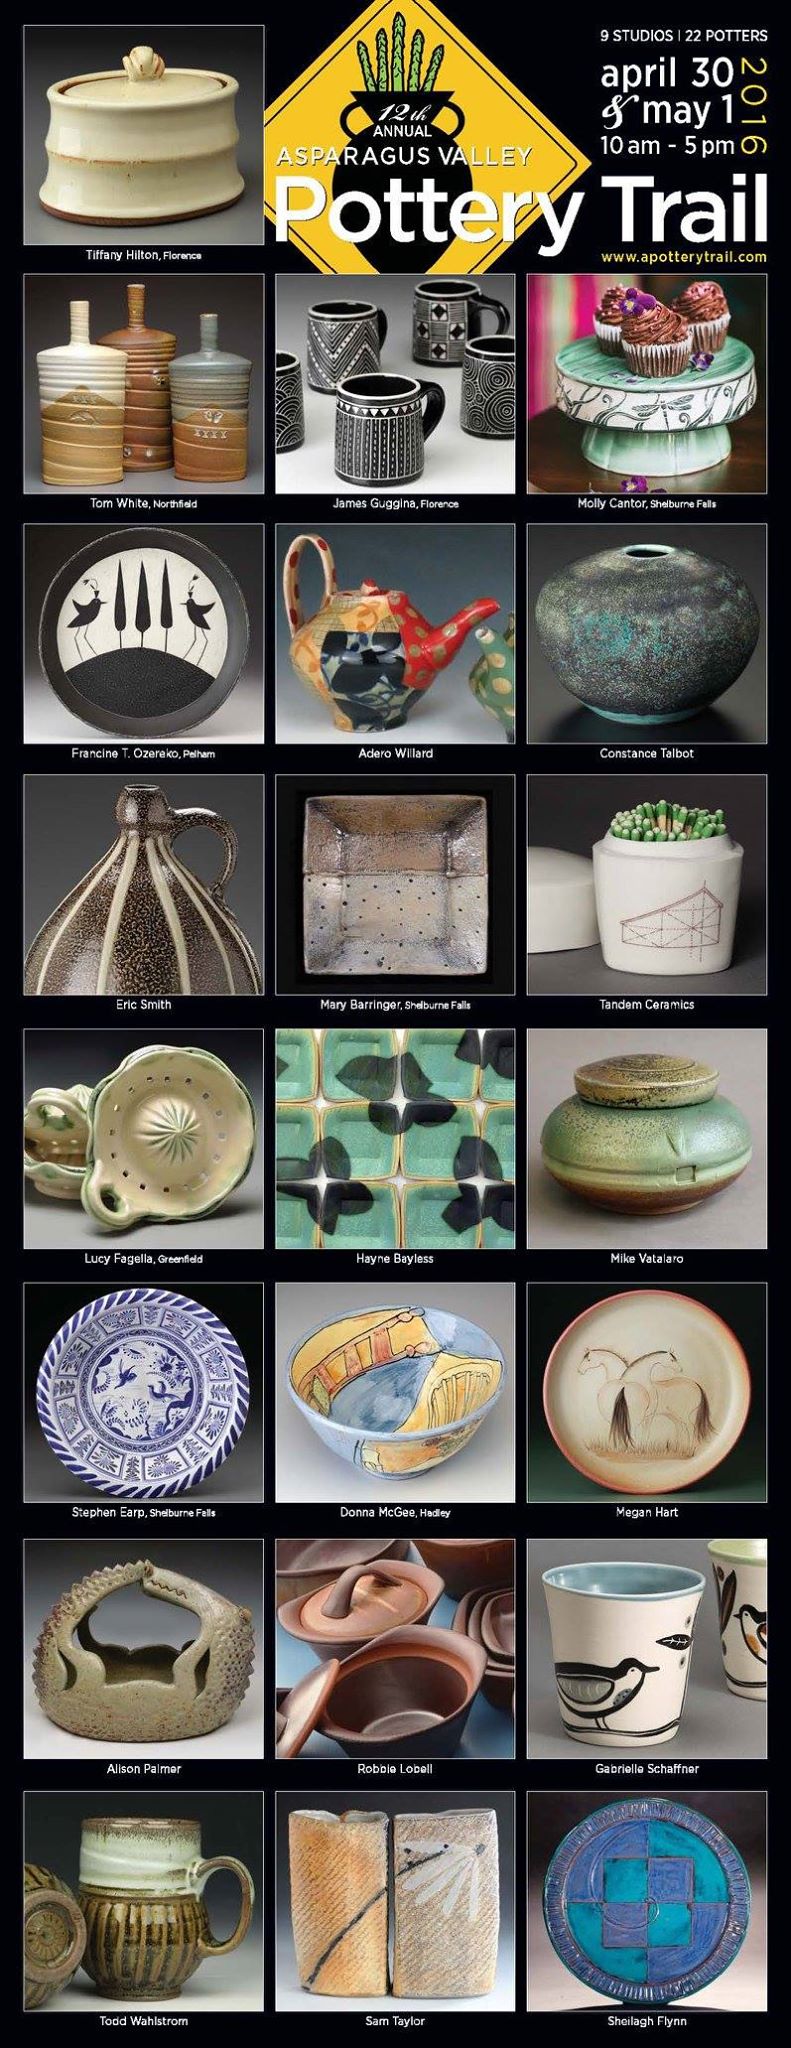 9 Studios, 22 Potters, 12th Annual Asparagus Valley Pottery Trail, April 30 and May 1, 10AM - 5PM